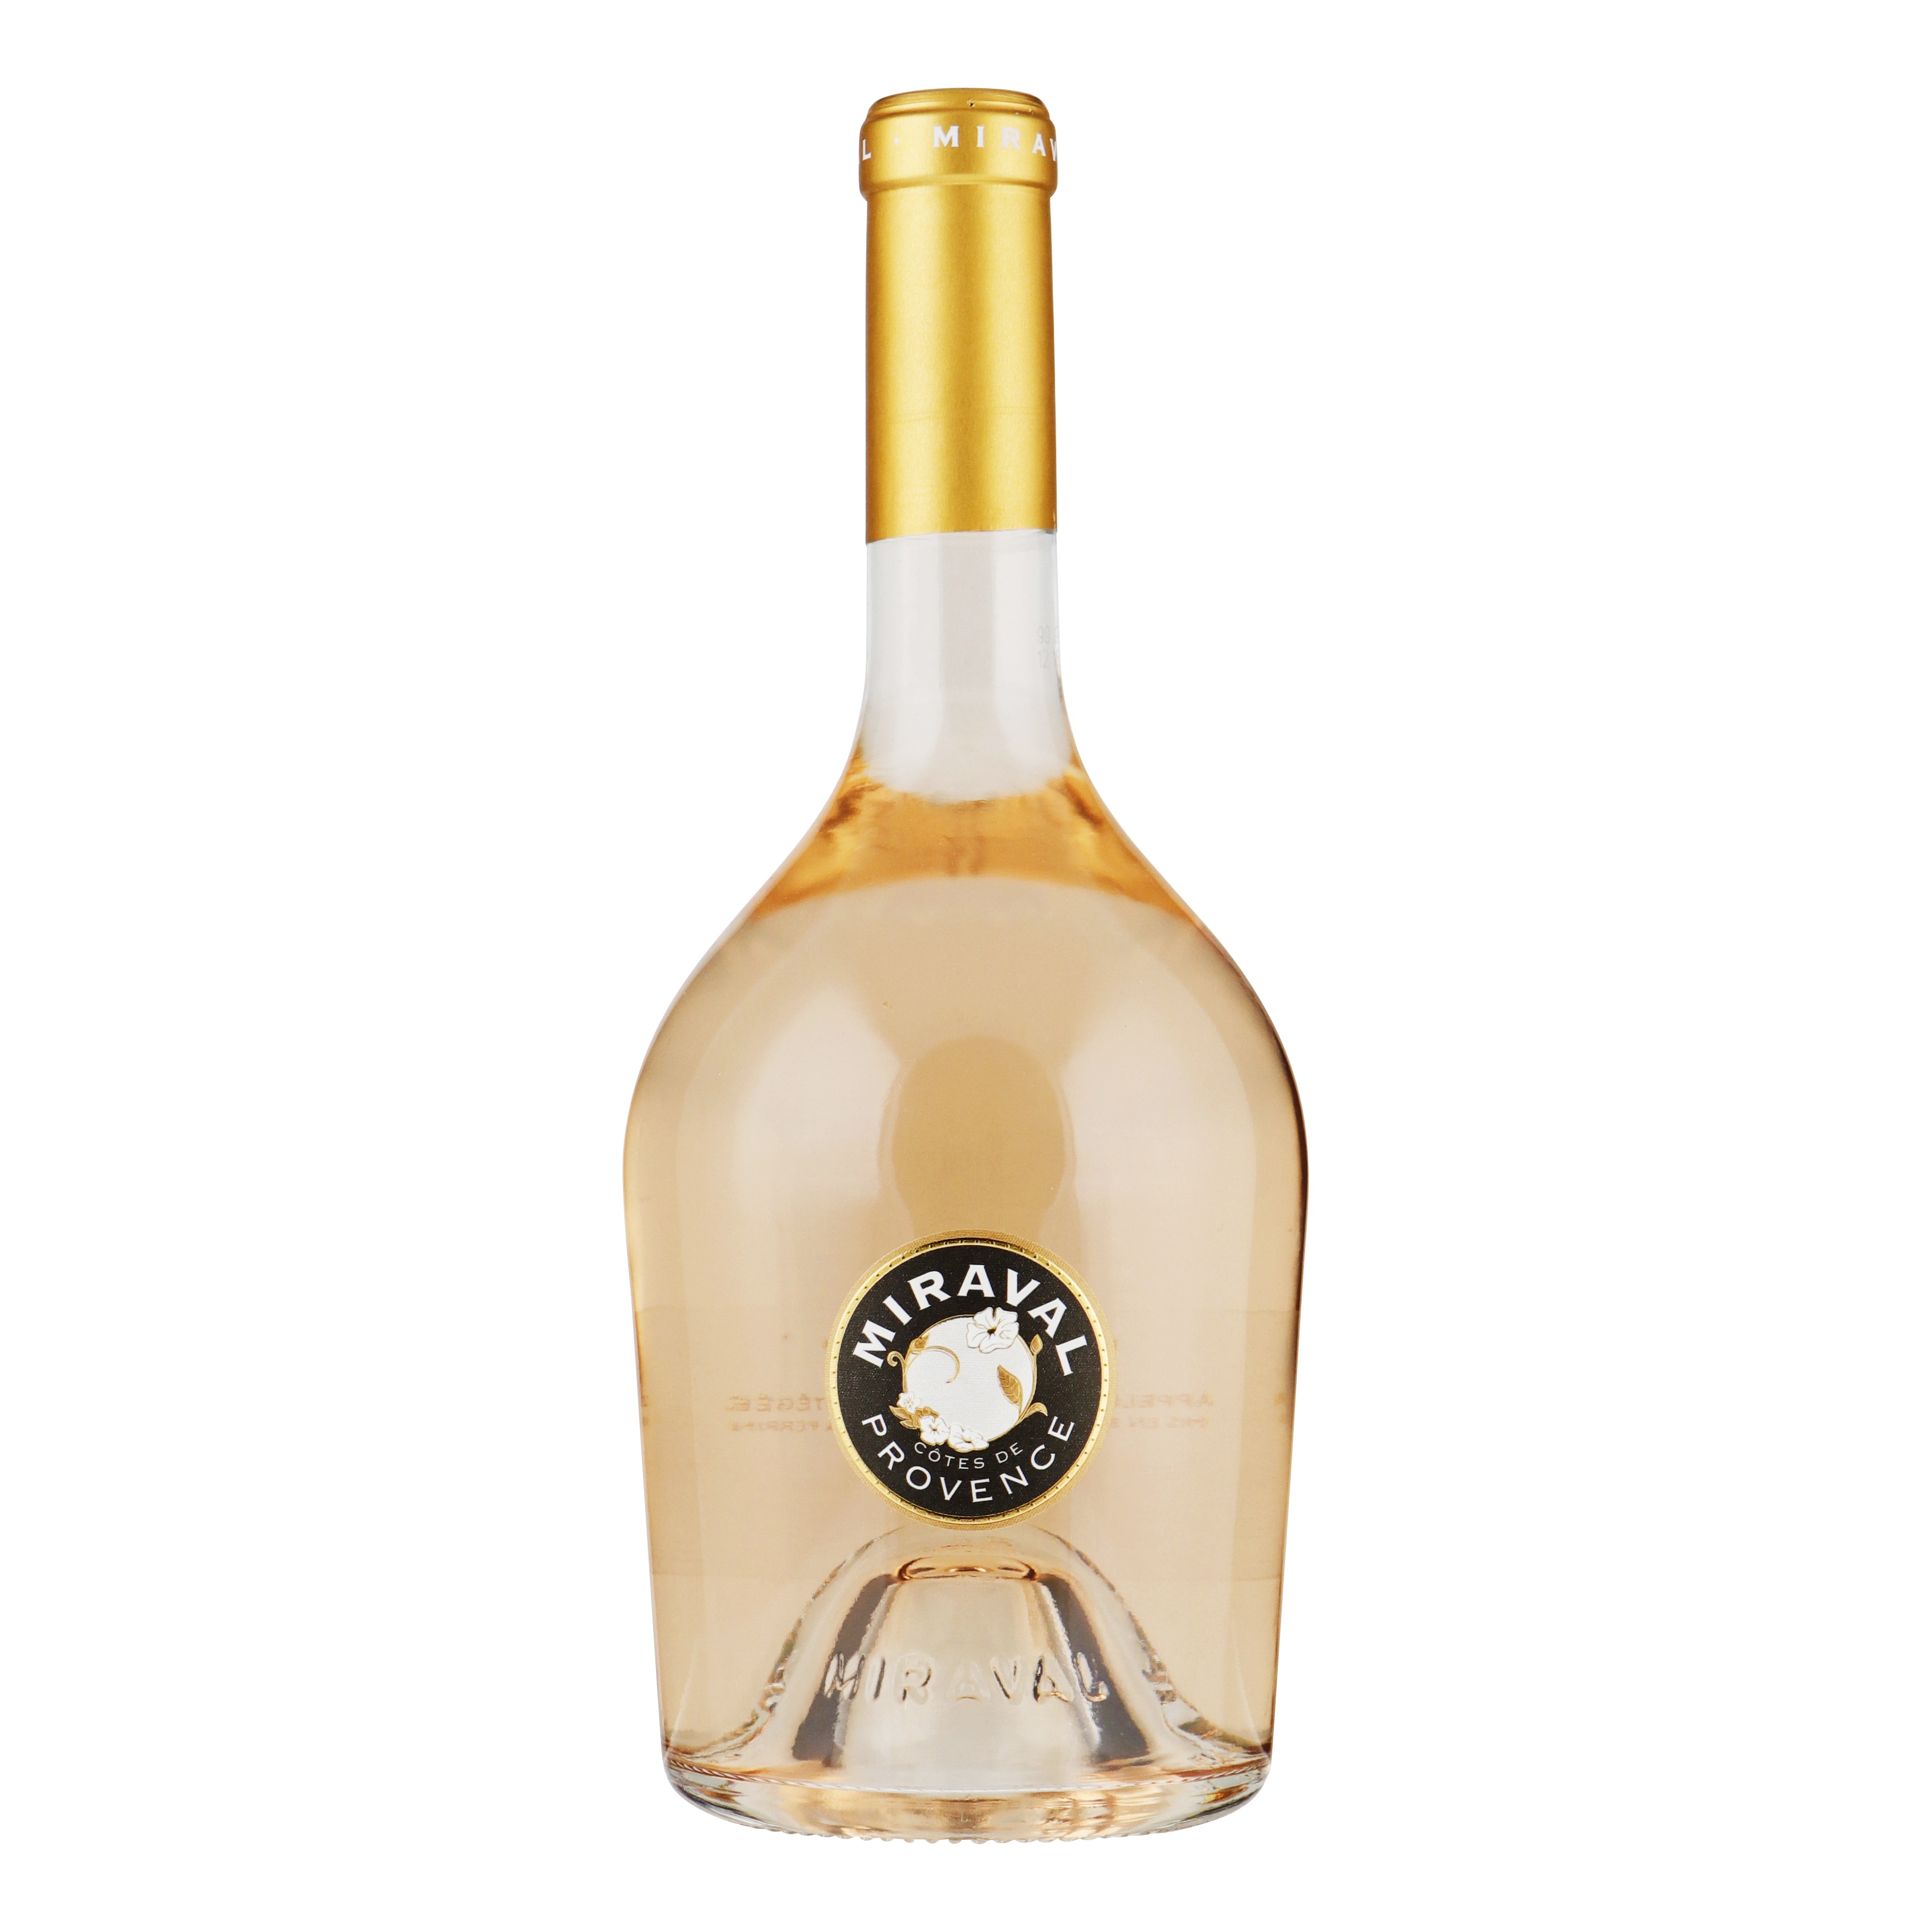 75243 Chateau Miraval rose 6x0,75 liter